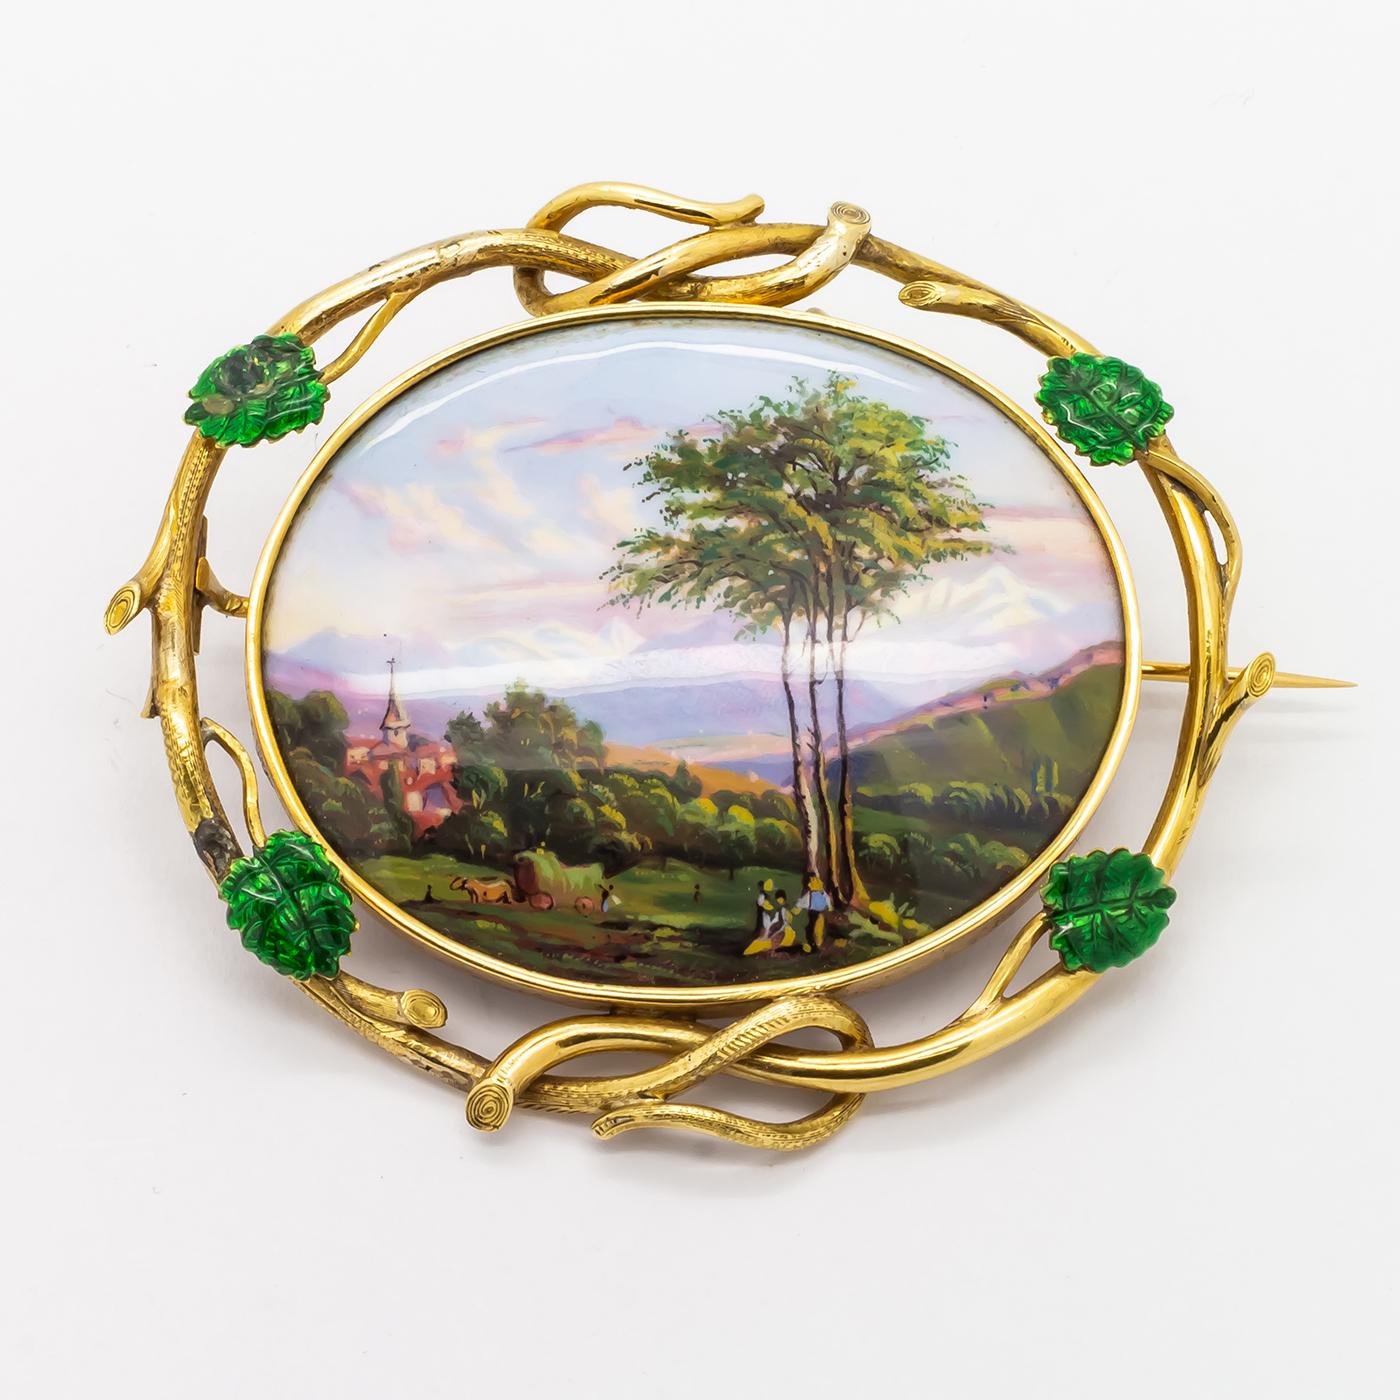 A Swiss enamel brooch, with an oval hand painted scene depicting mountains in the distance with a church surrounded by trees, with a feature tree, people and animals to the foreground, within a twisted gold frame with four green enamel leaves, circa